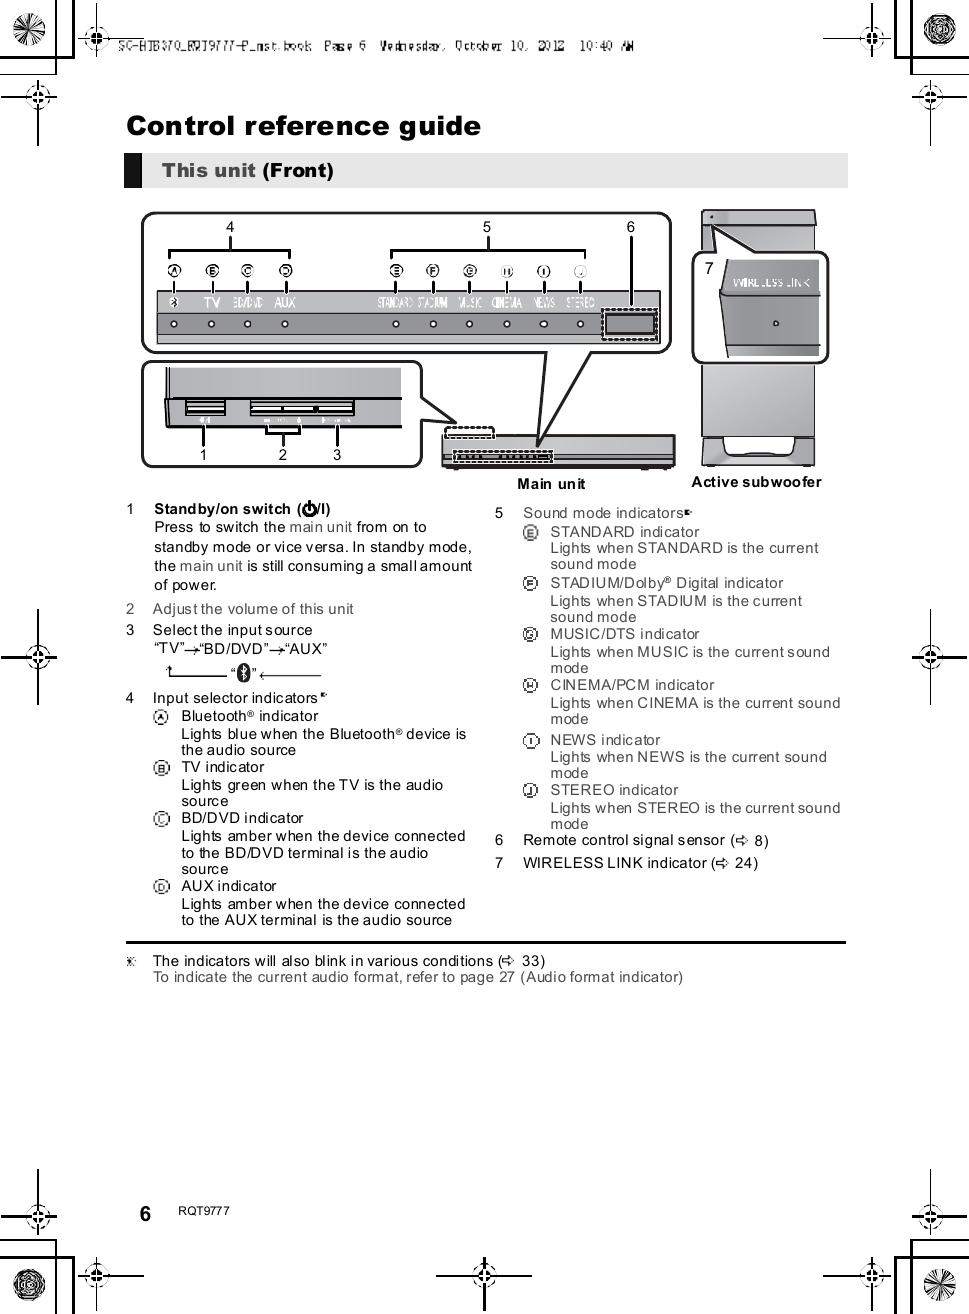 6R QT977 7Control reference guide1Standby/on switch ( /I)Press to switch the main unit from on tostandby mode or vice versa. In standby mode,the main unit is still consuming a small amountof power.2 Adjust the volume of this unit3 Select the input sourceTVBD/DVDAUX4 Input selector indicatorsBluetooth® indicatorLights blue when the Bluetooth® device isthe audio sourceTV indicatorLights green when the TV is the audiosourceBD/DVD indicatorLights amber when the device connectedto the BD/DVD terminal is the audiosourceAU X i n di ca torLights amber when the device connectedto the AUX terminal is the audio source5Sound mode indicatorsSTANDARD indicatorLights when STANDARD is the currentsound modeSTADIUM/Dolby® Digital indicatorLights when STADIUM is the currentsound modeMUSIC/DTS indicatorLights when MUSIC is the current soundmodeCINEMA/PCM indicatorLights when CINEMA is the current soundmodeNEWS indicatorLights when NEWS is the current soundmodeSTEREO indicatorLights when STEREO is the current soundmode6 Remote control signal sensor ( 8)7 WIRELESS LINK indicator ( 24)  The indicators will also blink in various conditions ( 33)To indicate the current audio format, refer to page 27 (Audio format indicator)This unit (Front)71234 56M a in  un itActive subwoofer